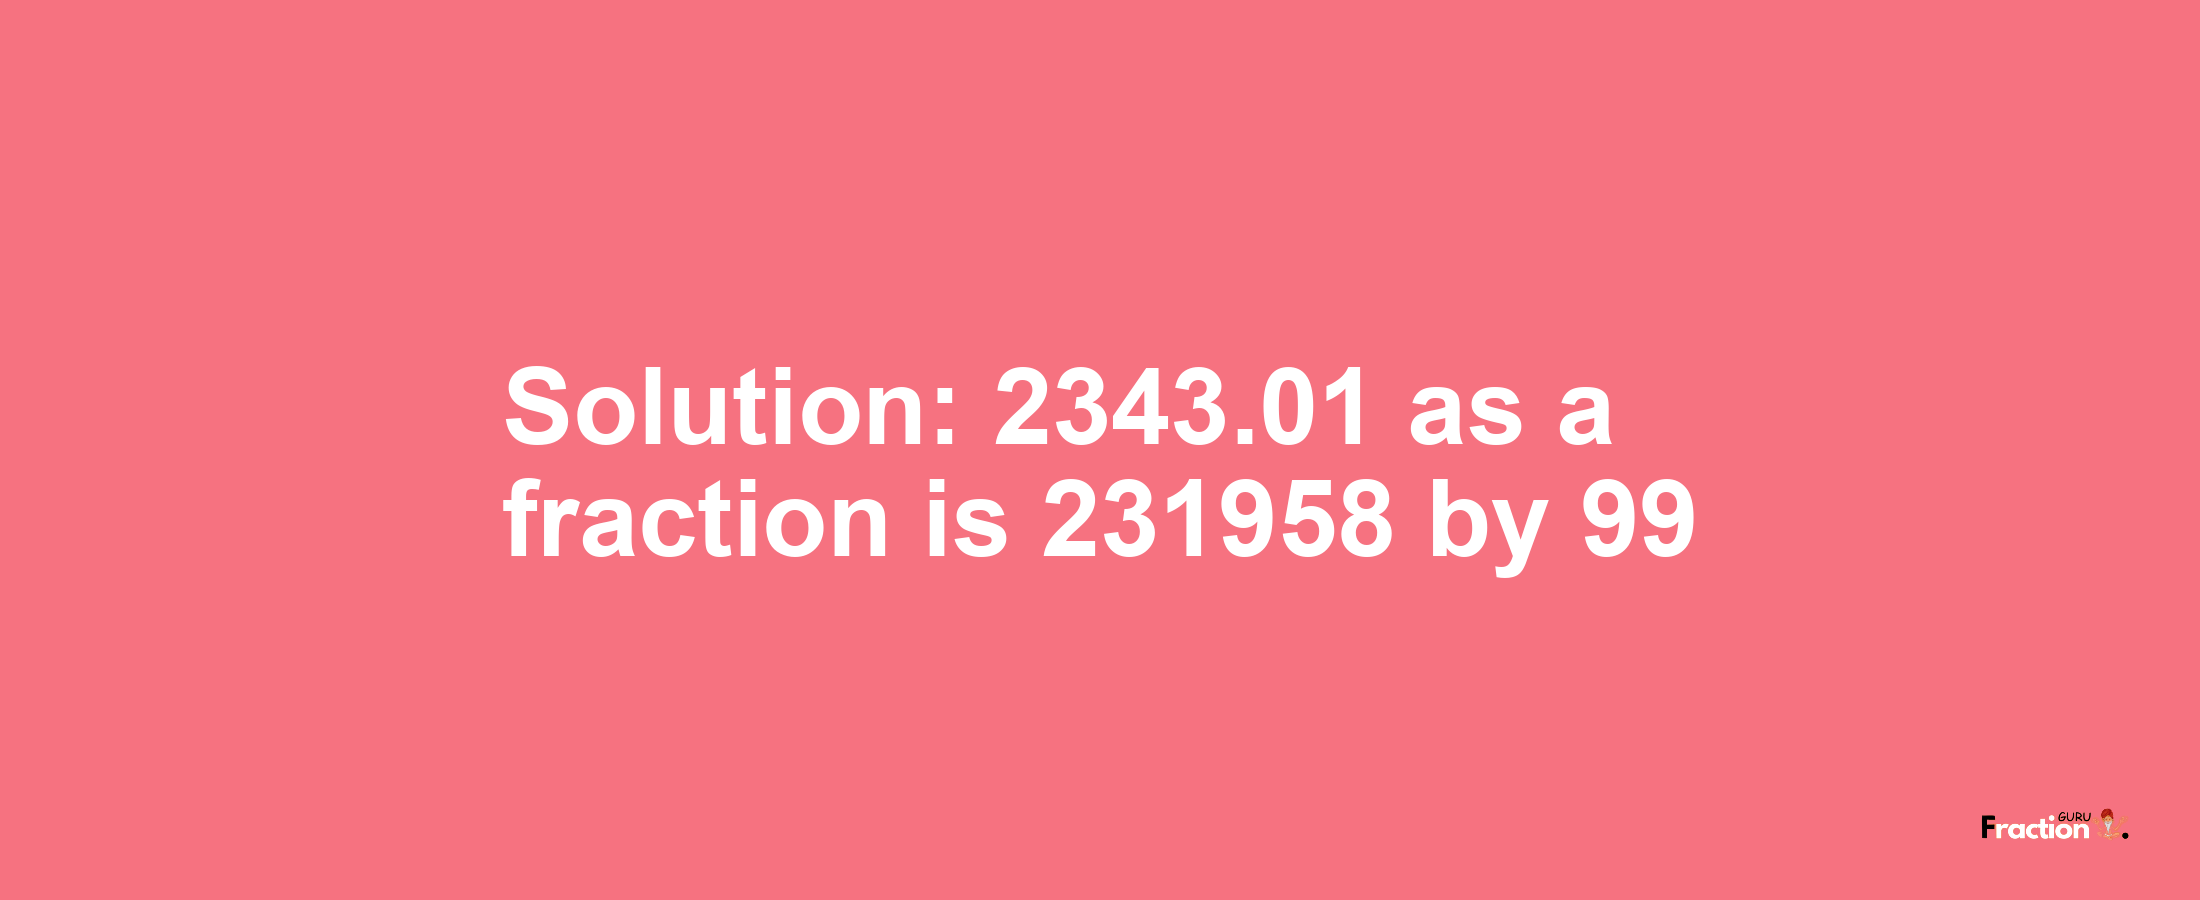 Solution:2343.01 as a fraction is 231958/99